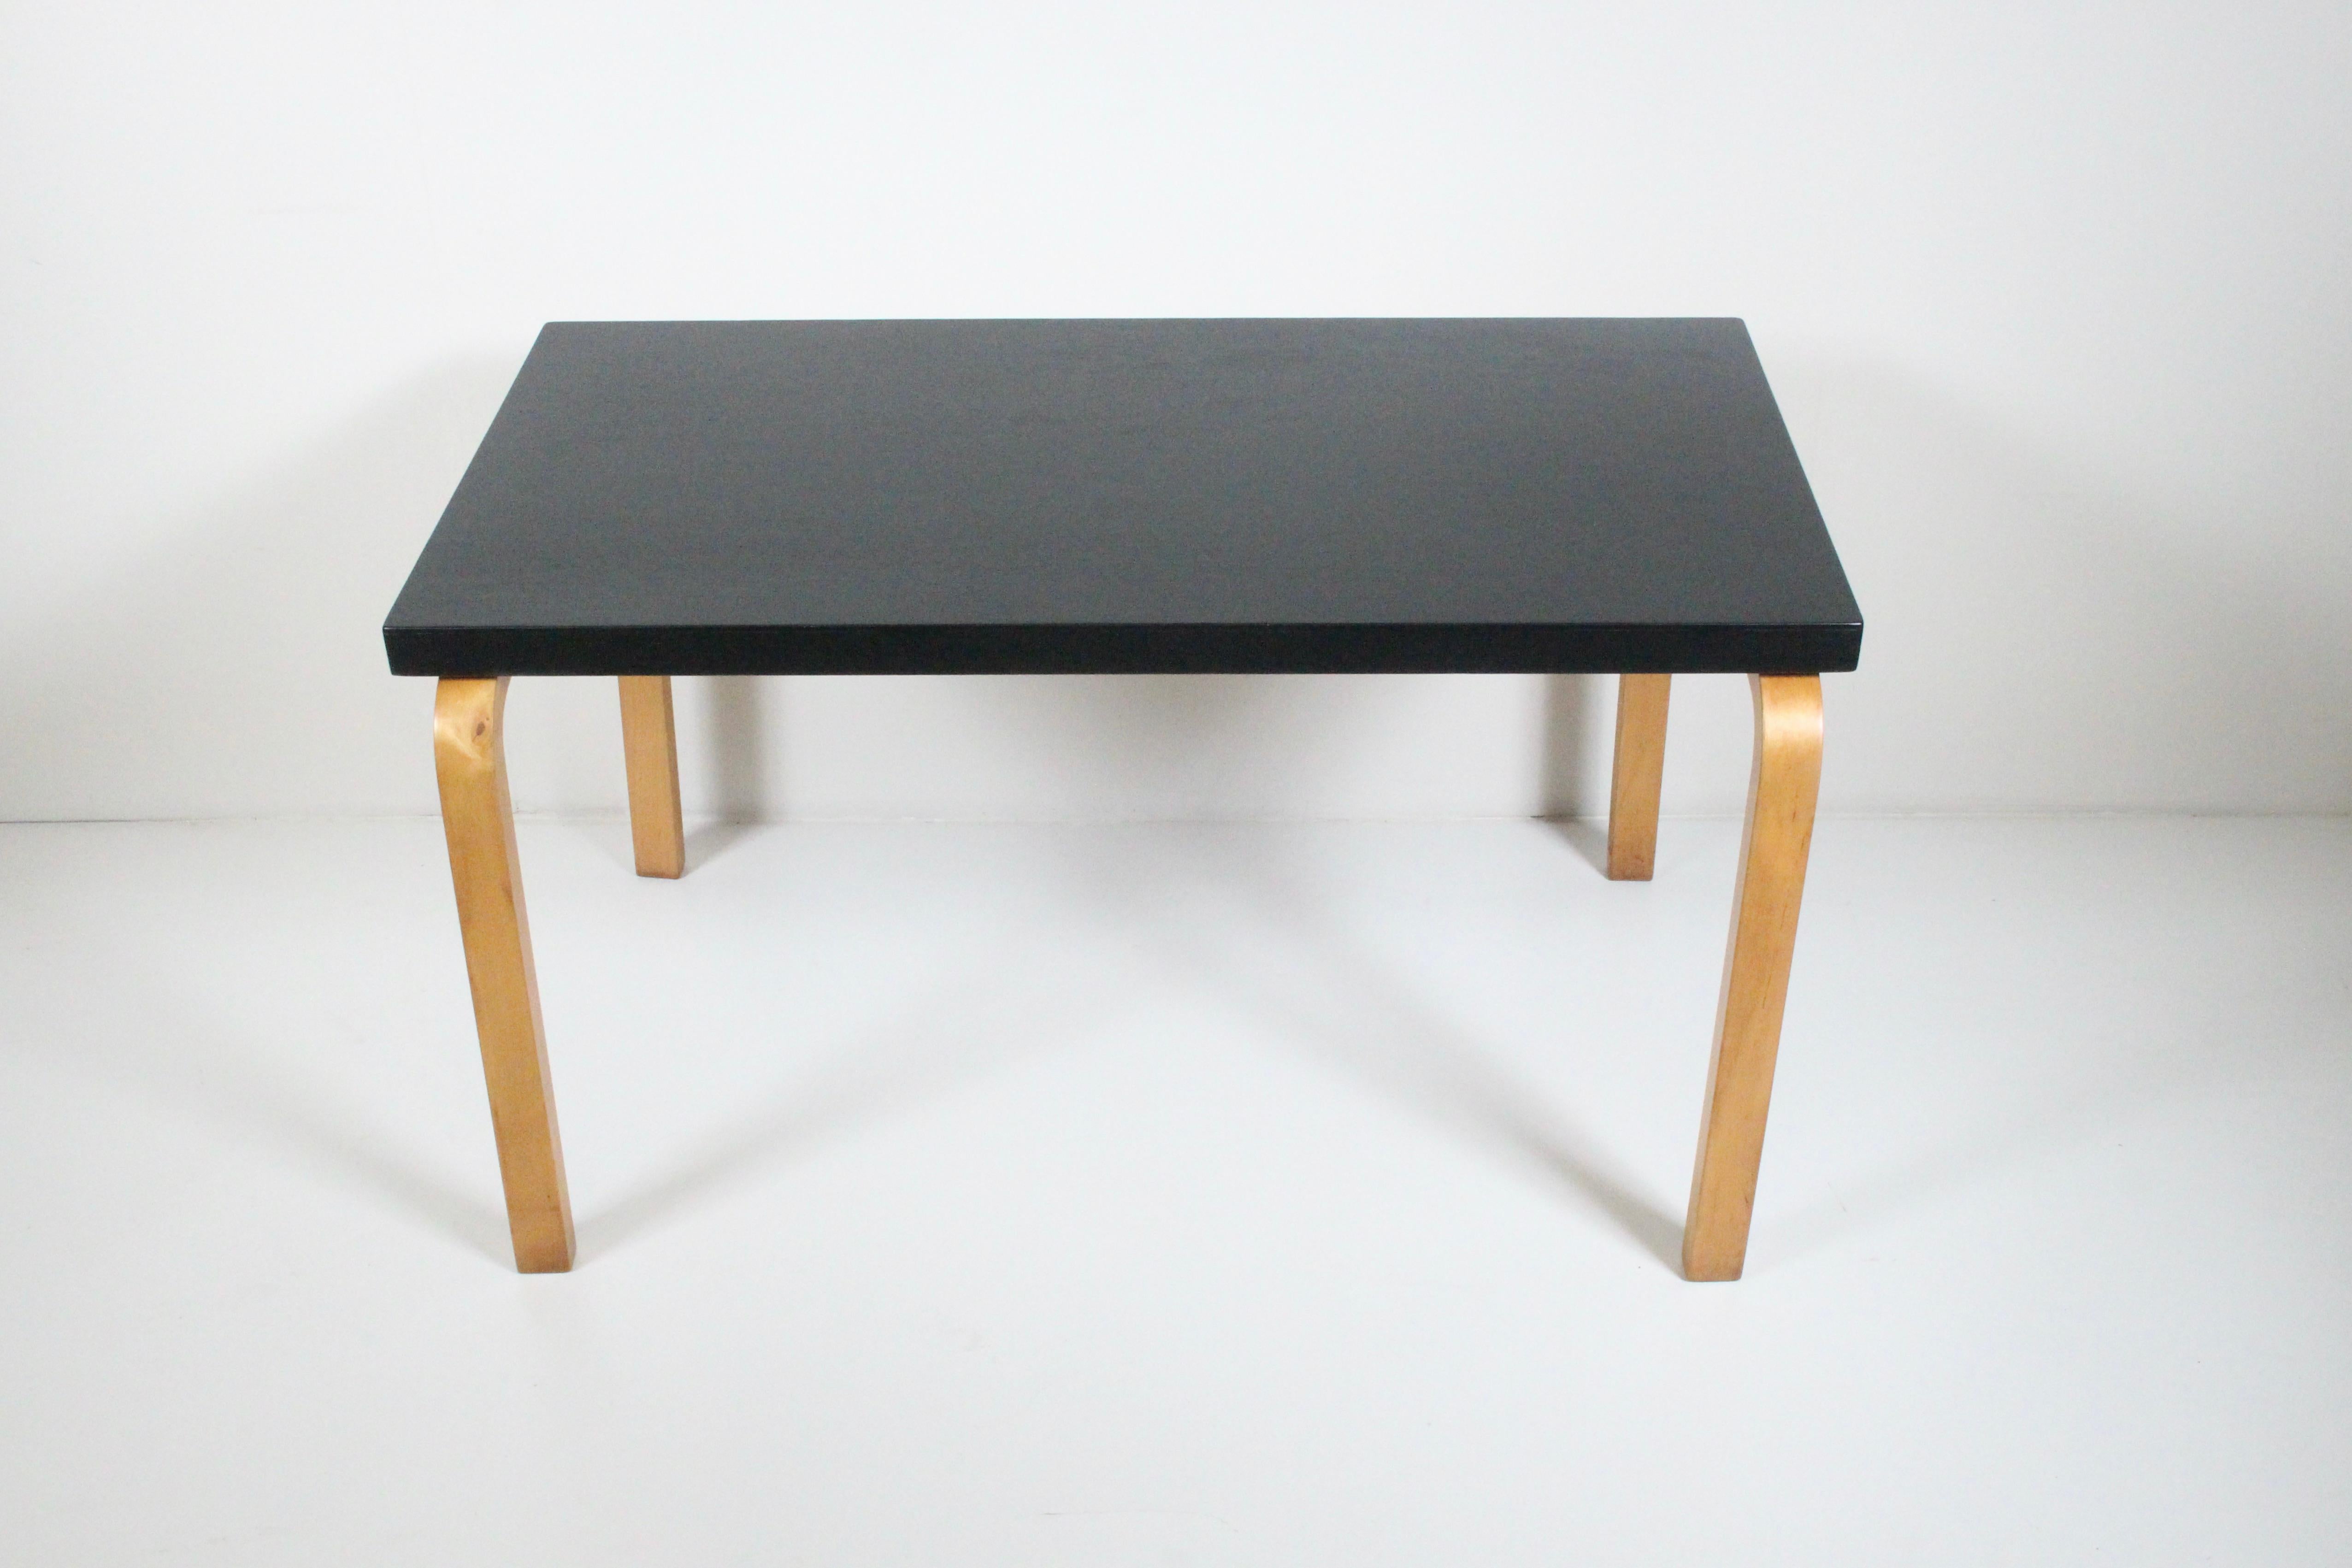 Early Alvar Aalto for Finsven Inc. Side Table. End Table. Coffee Table. Featuring a rectangular form, newly relacquered Black surface, multi layered Birch bentwood legs, with 7.5